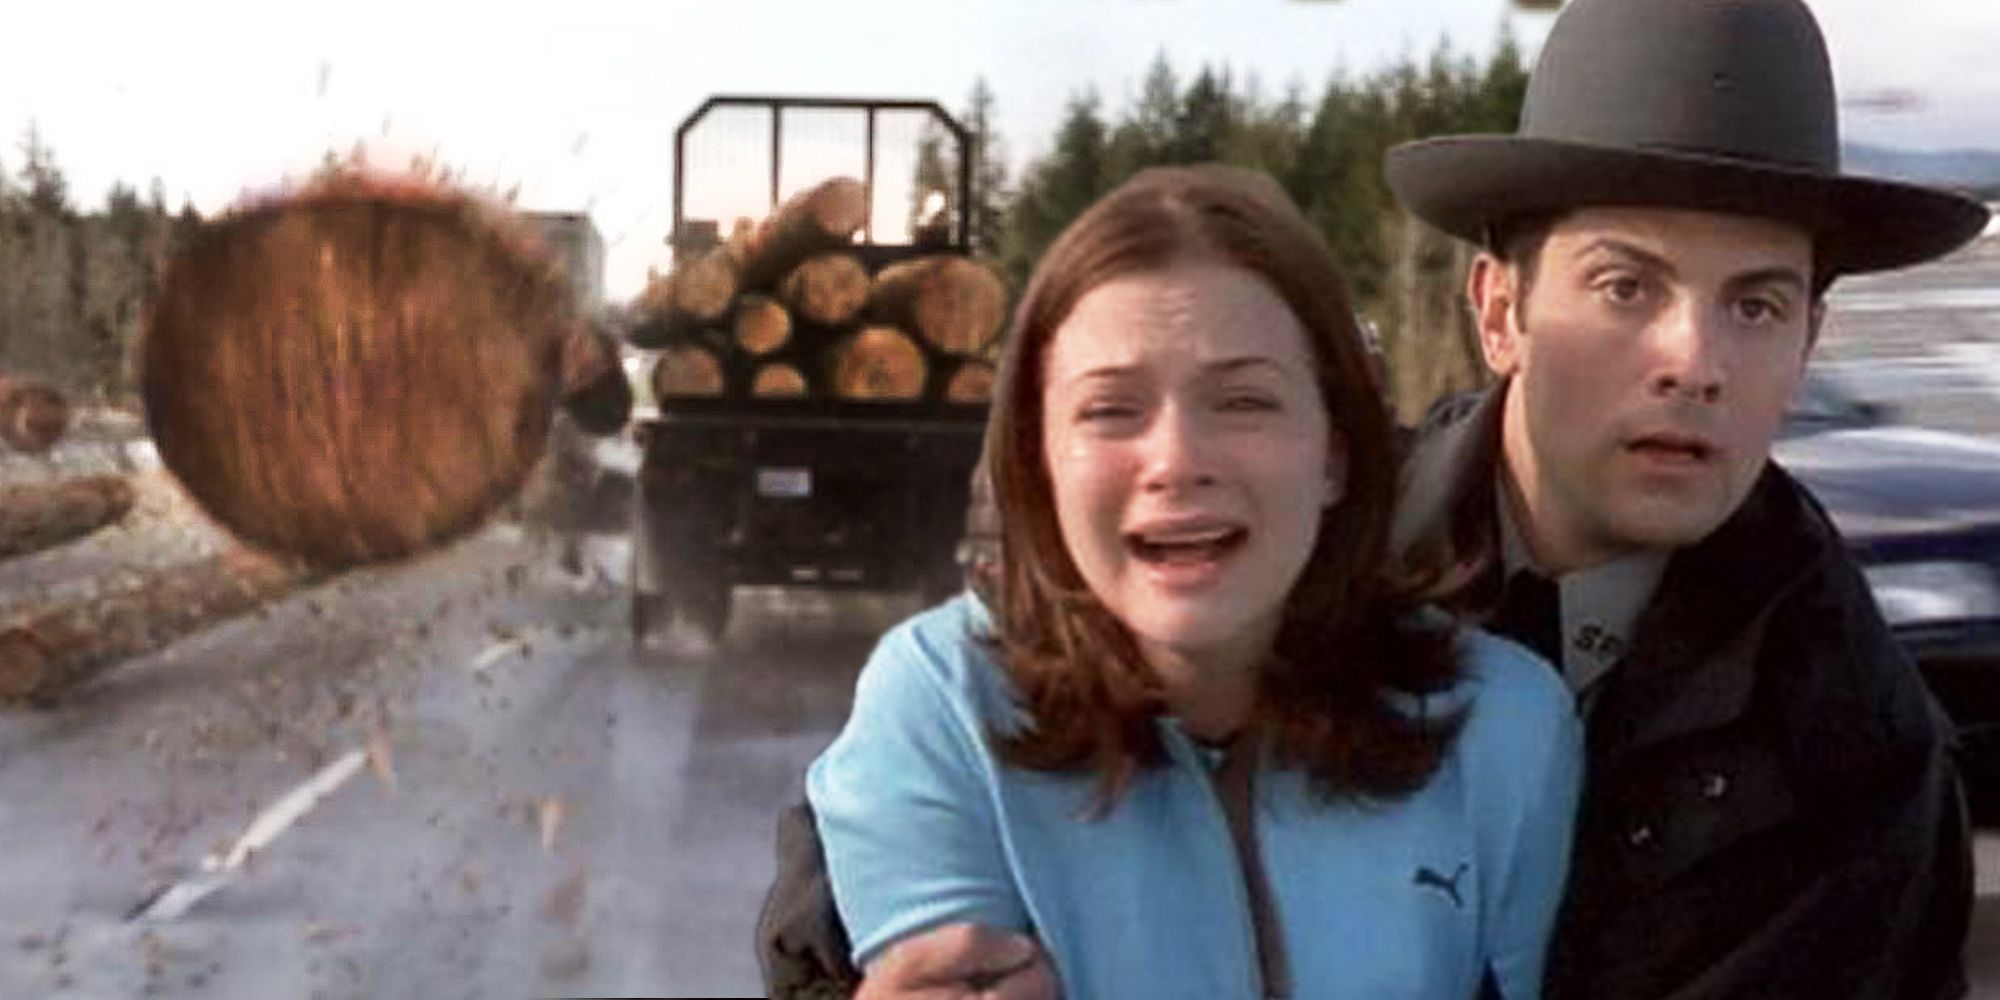 Kimberly Corman and Marshal Thomas Burke in Final Destination's 2 Freeway Log Accident Scene